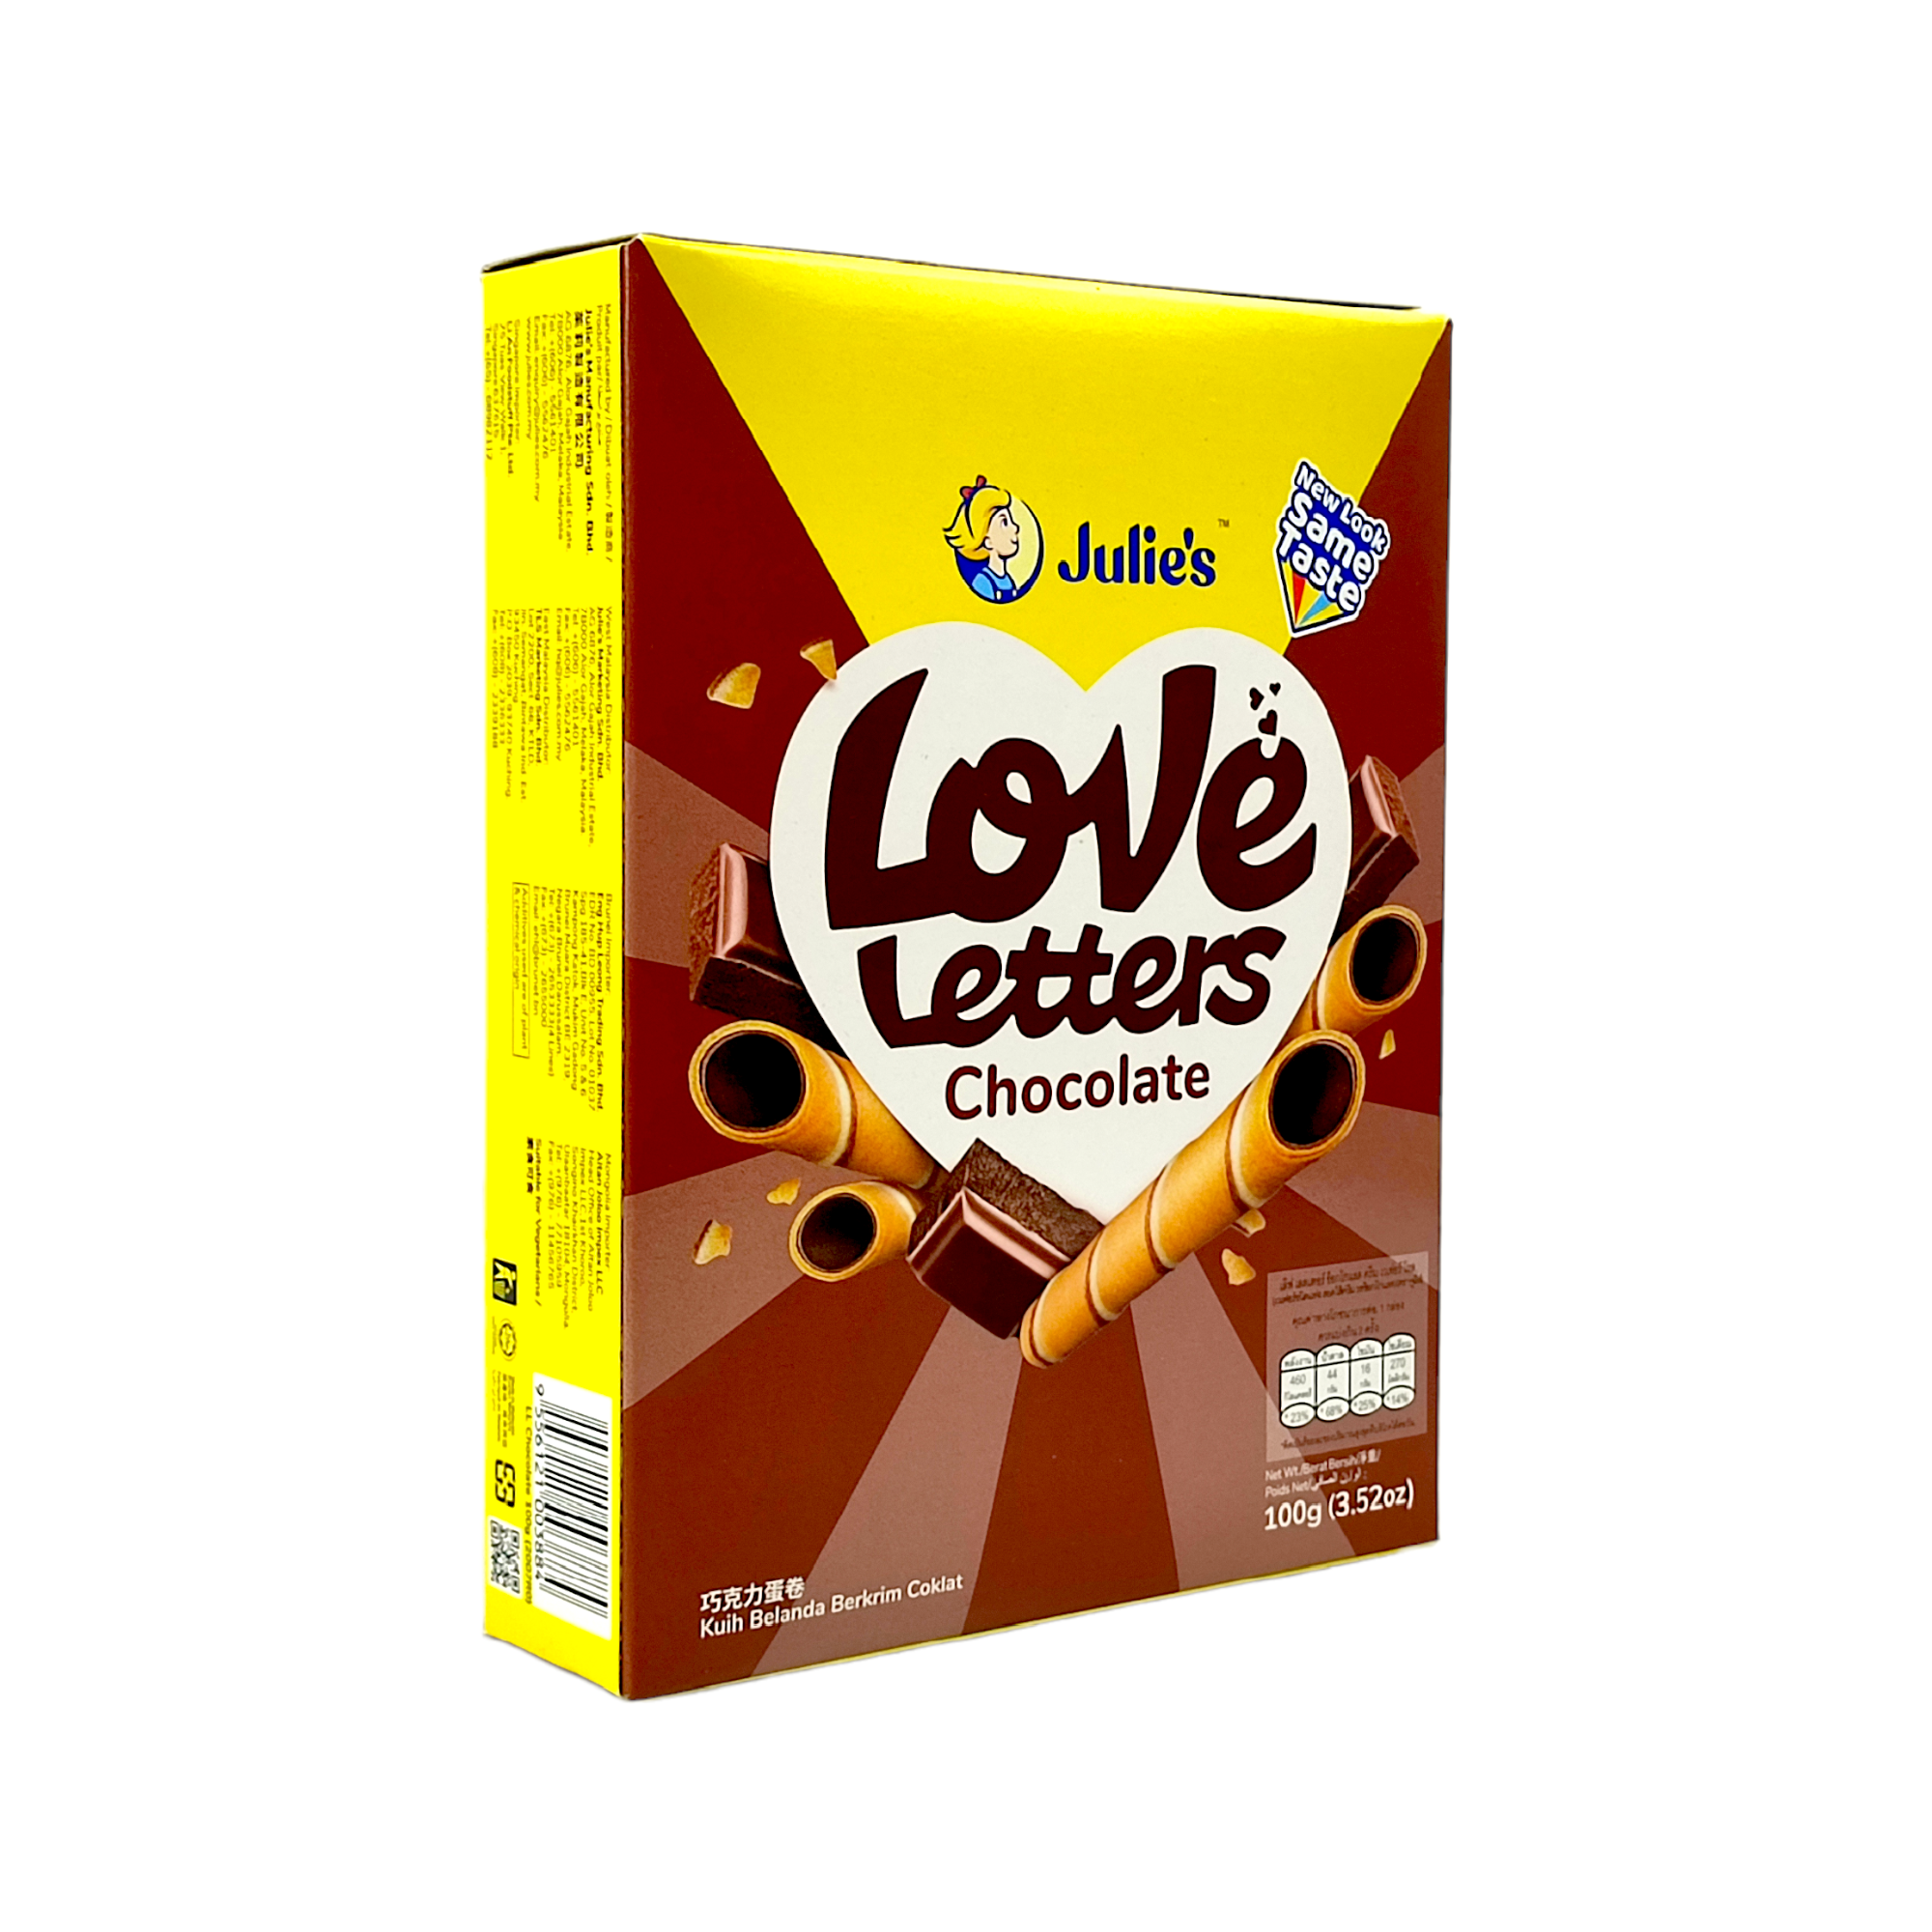 julie-s-love-letters-chocolate-wafer-roll-100g-shopifull